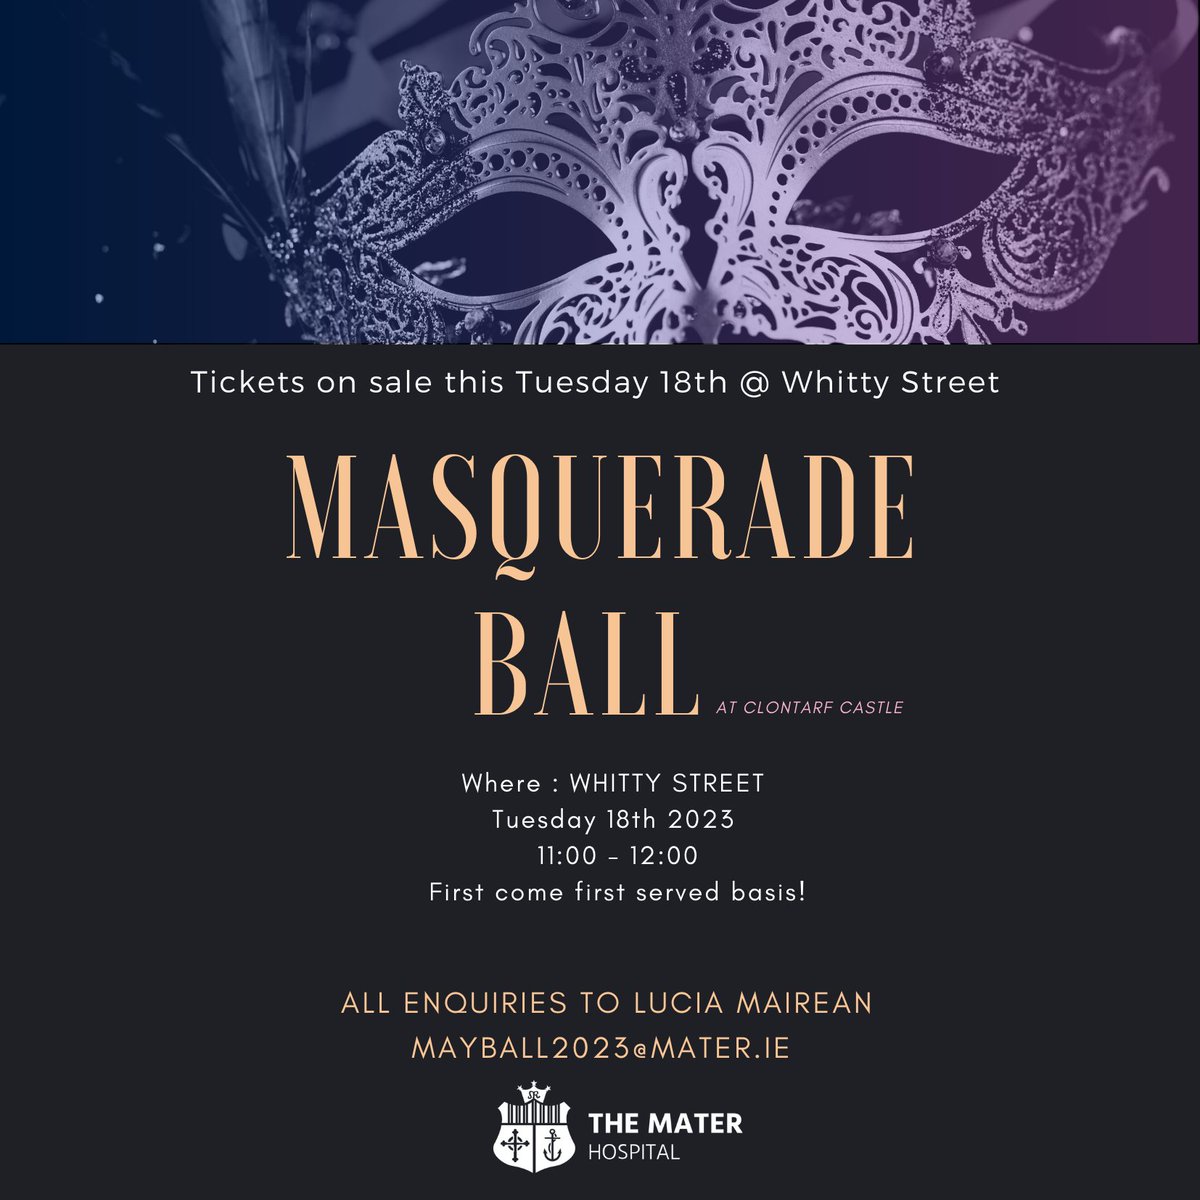 Last chance to buy tickets for the Mater Masquerade Ball!!  Tickets on sale Tuesday 18th April 11-12 on Whitty Street 🥳 @MaterTrauma @ClontarfCastle @ThePillarDublin @heeryd @MaterNursing @Matersurgery @LeanMater @MaterHSCPs @MaterLearning @TheMaterFoundat @MaterTVNs  💃